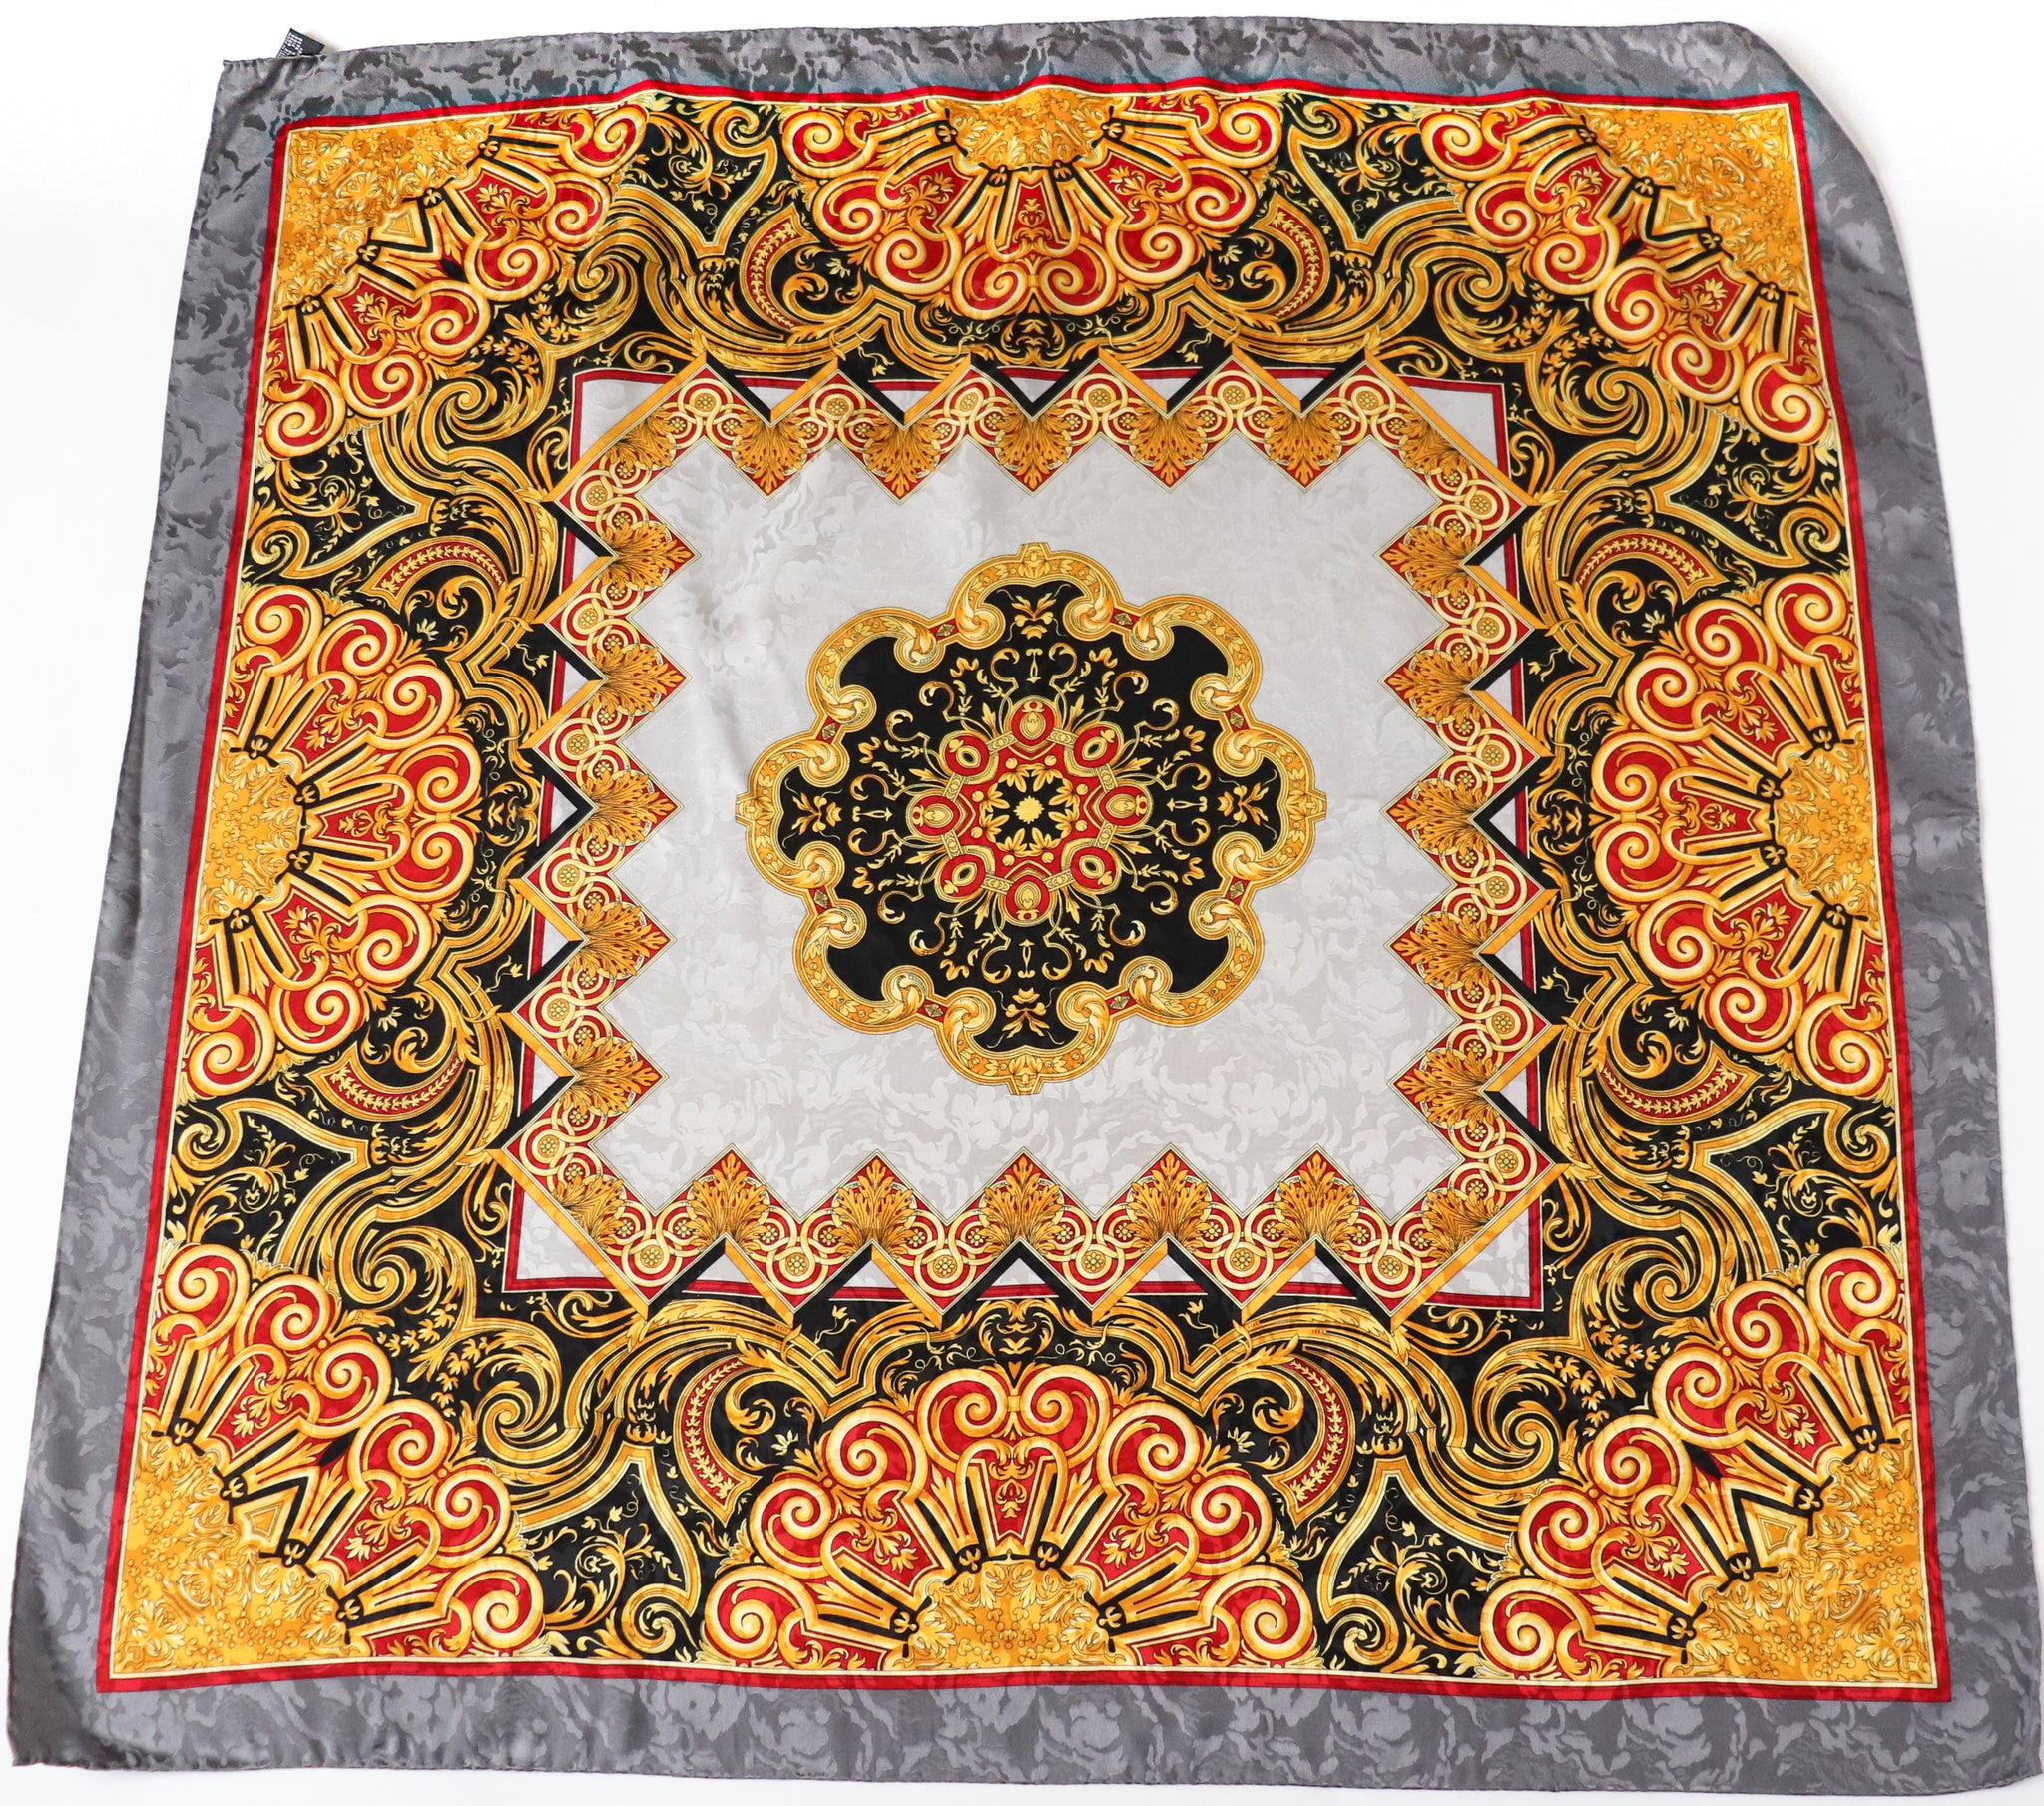 Baroque Vintage Silk Scarf - Grey / Red / Gold  90 x 90  -  LARGE